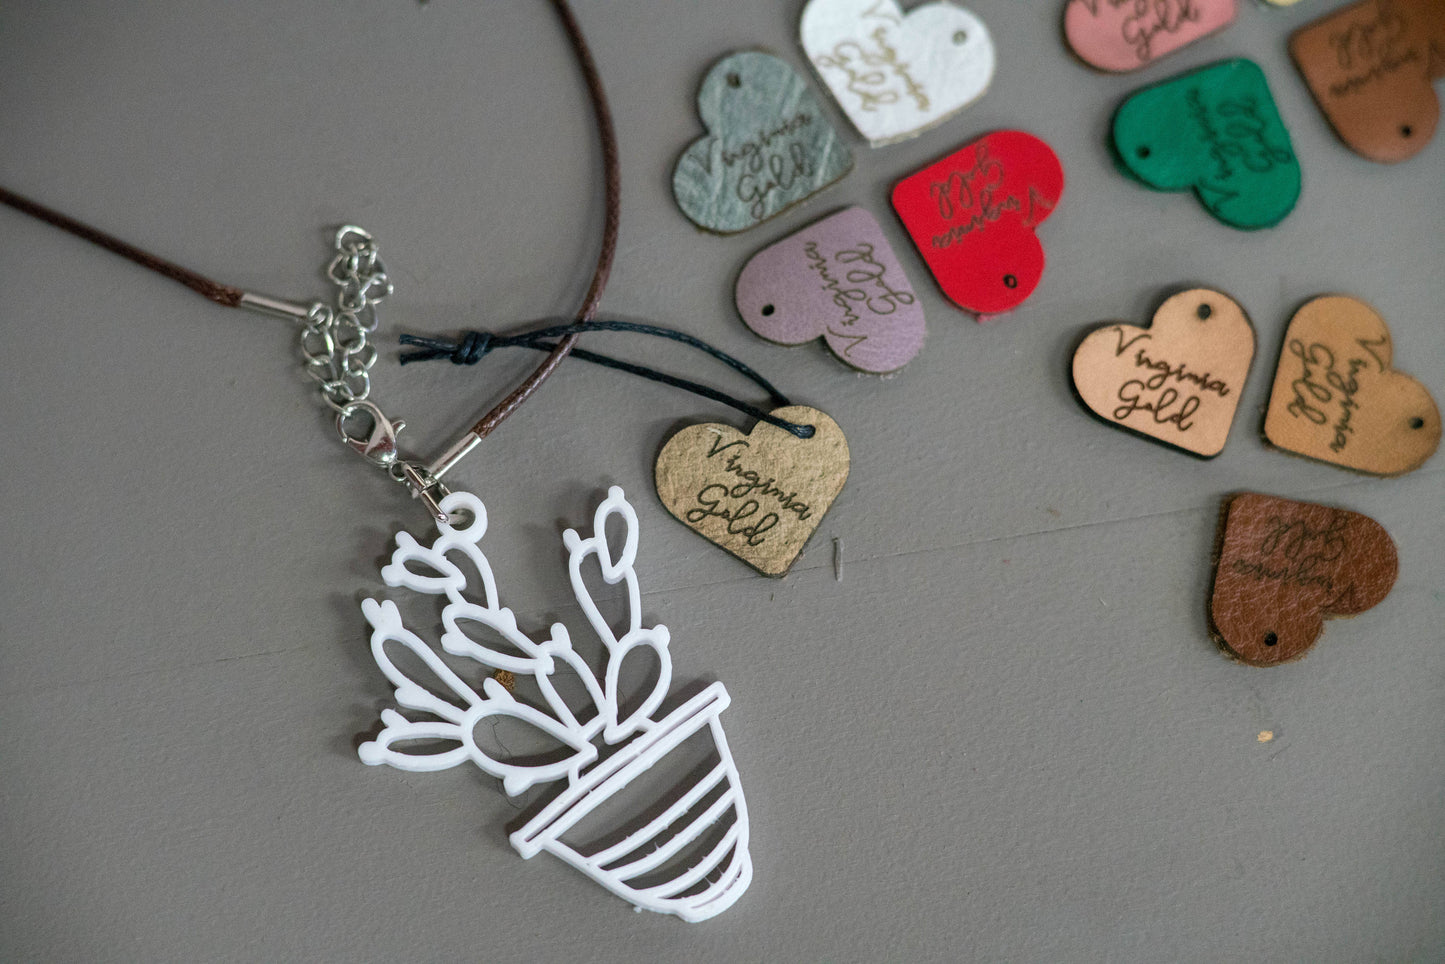 Jewelry Tags - Jewellery Tags - Necklace Tags - Hanging Tags - Leather tags - Garment Tags - Product Tags - Set of 12 - HEARTS